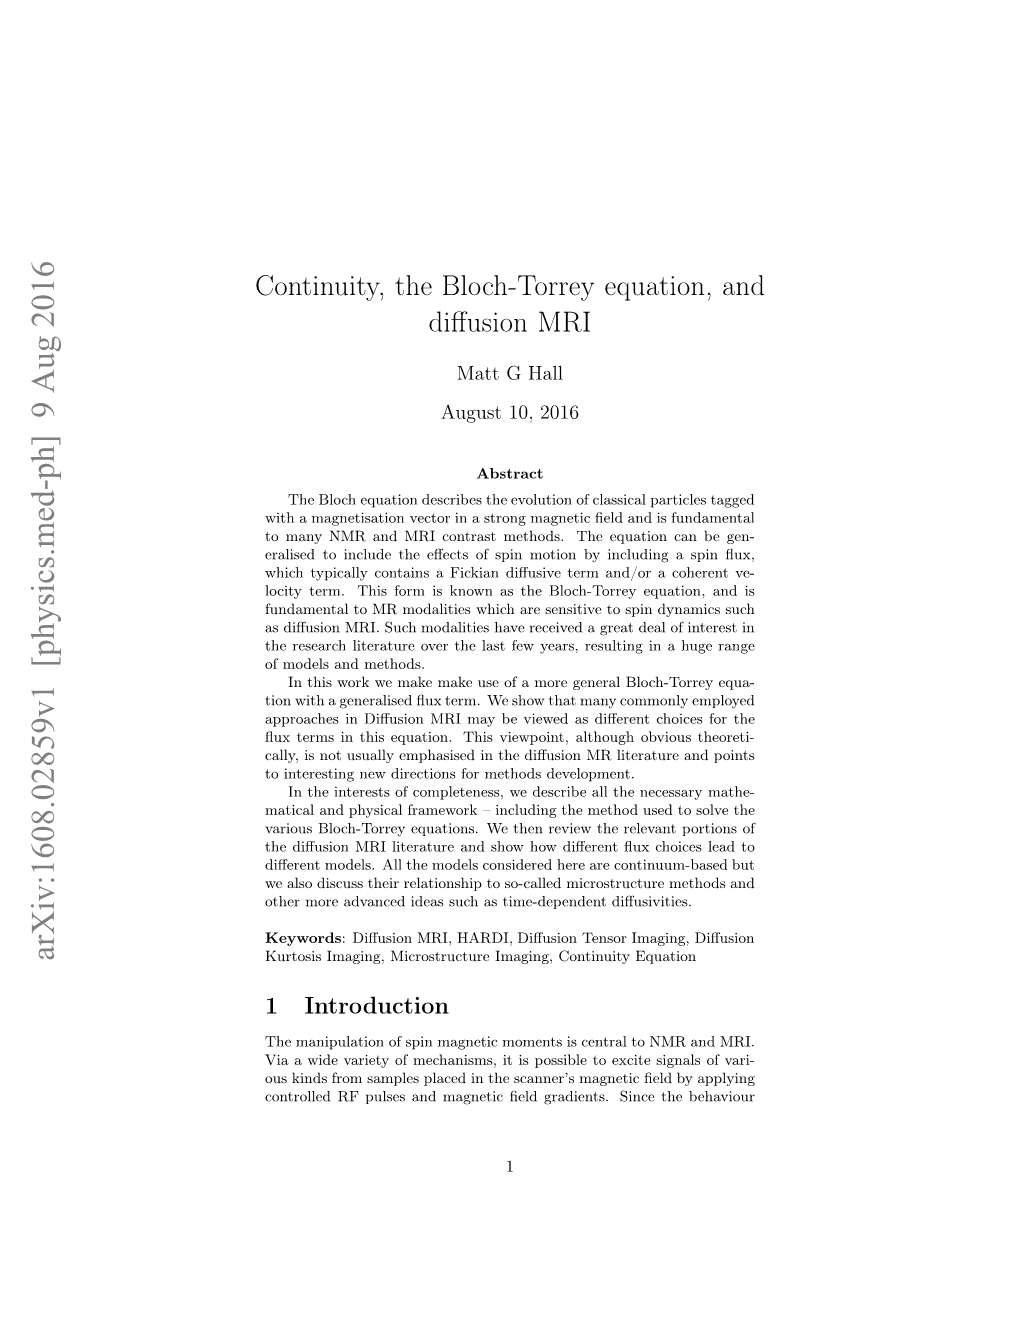 Continuity, the Bloch-Torrey Equation, and Diffusion